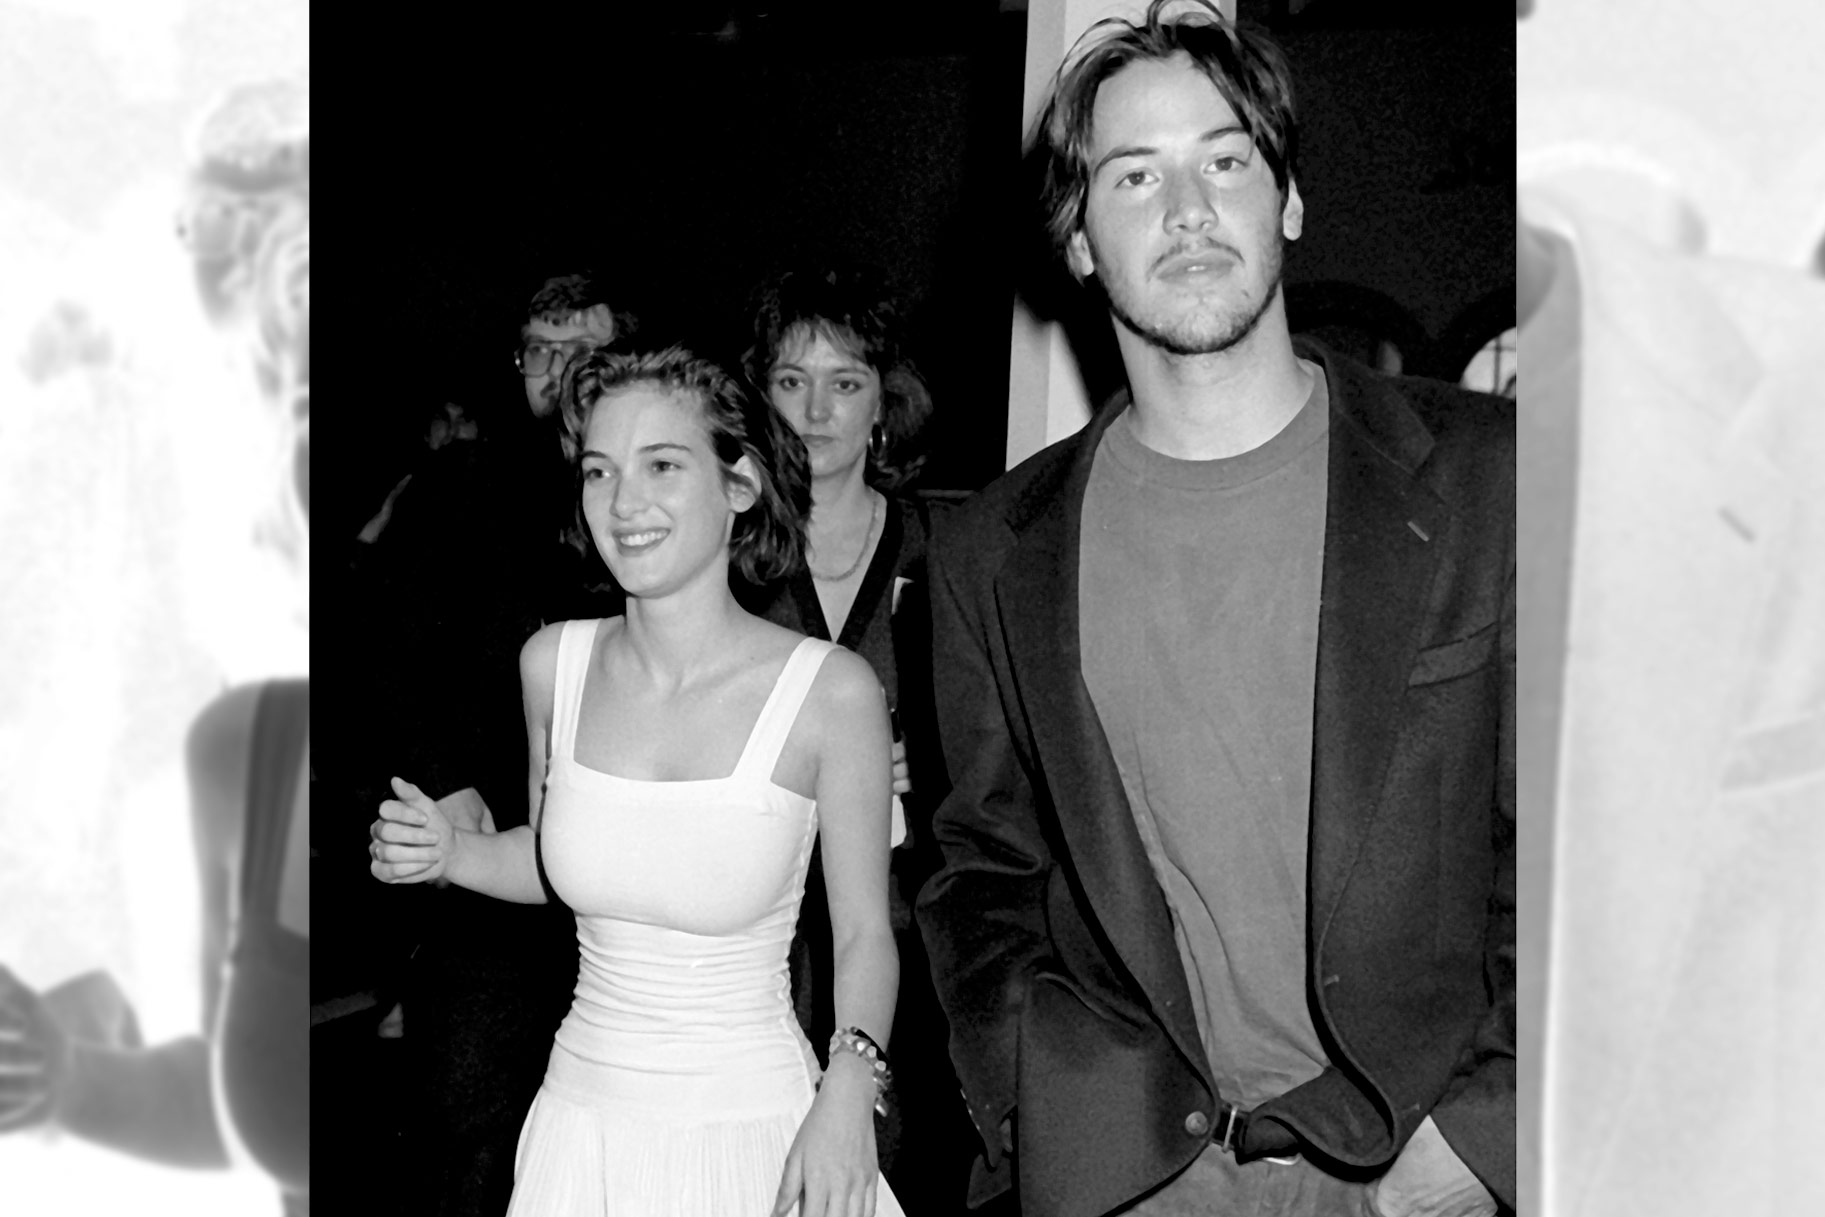 Winona Ryder & Keanu Reeves on March 25, 1989